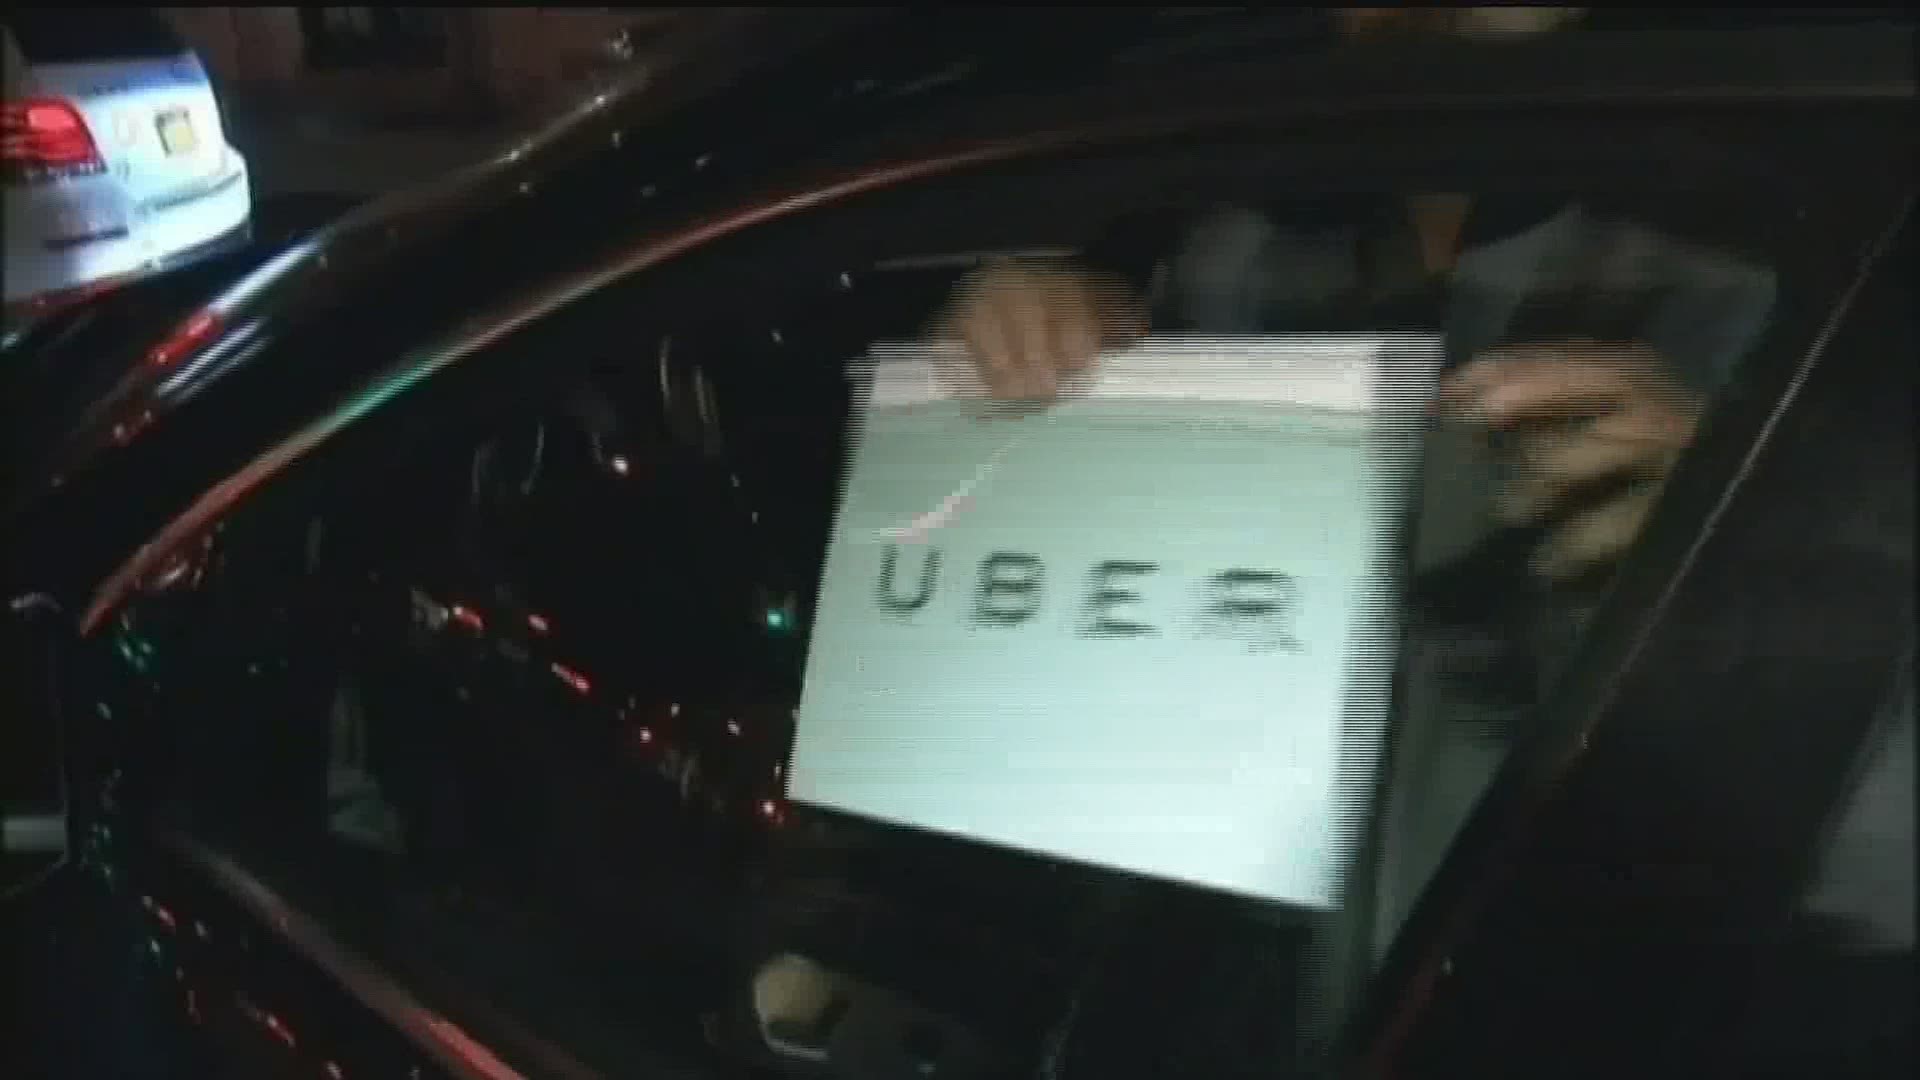 A local lawyer says that means people who are out of work right now, can collect unemployment benefits and also drive for Uber to make some extra cash.